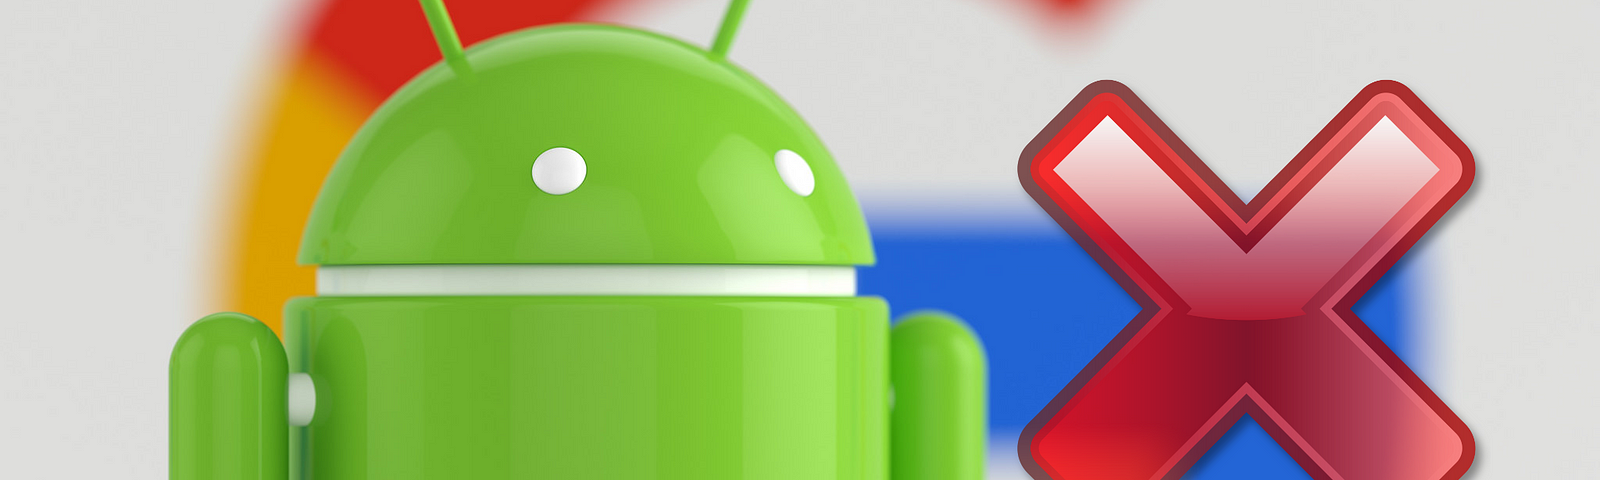 Are Your Android Apps Crashing? Here’s How to Fix It